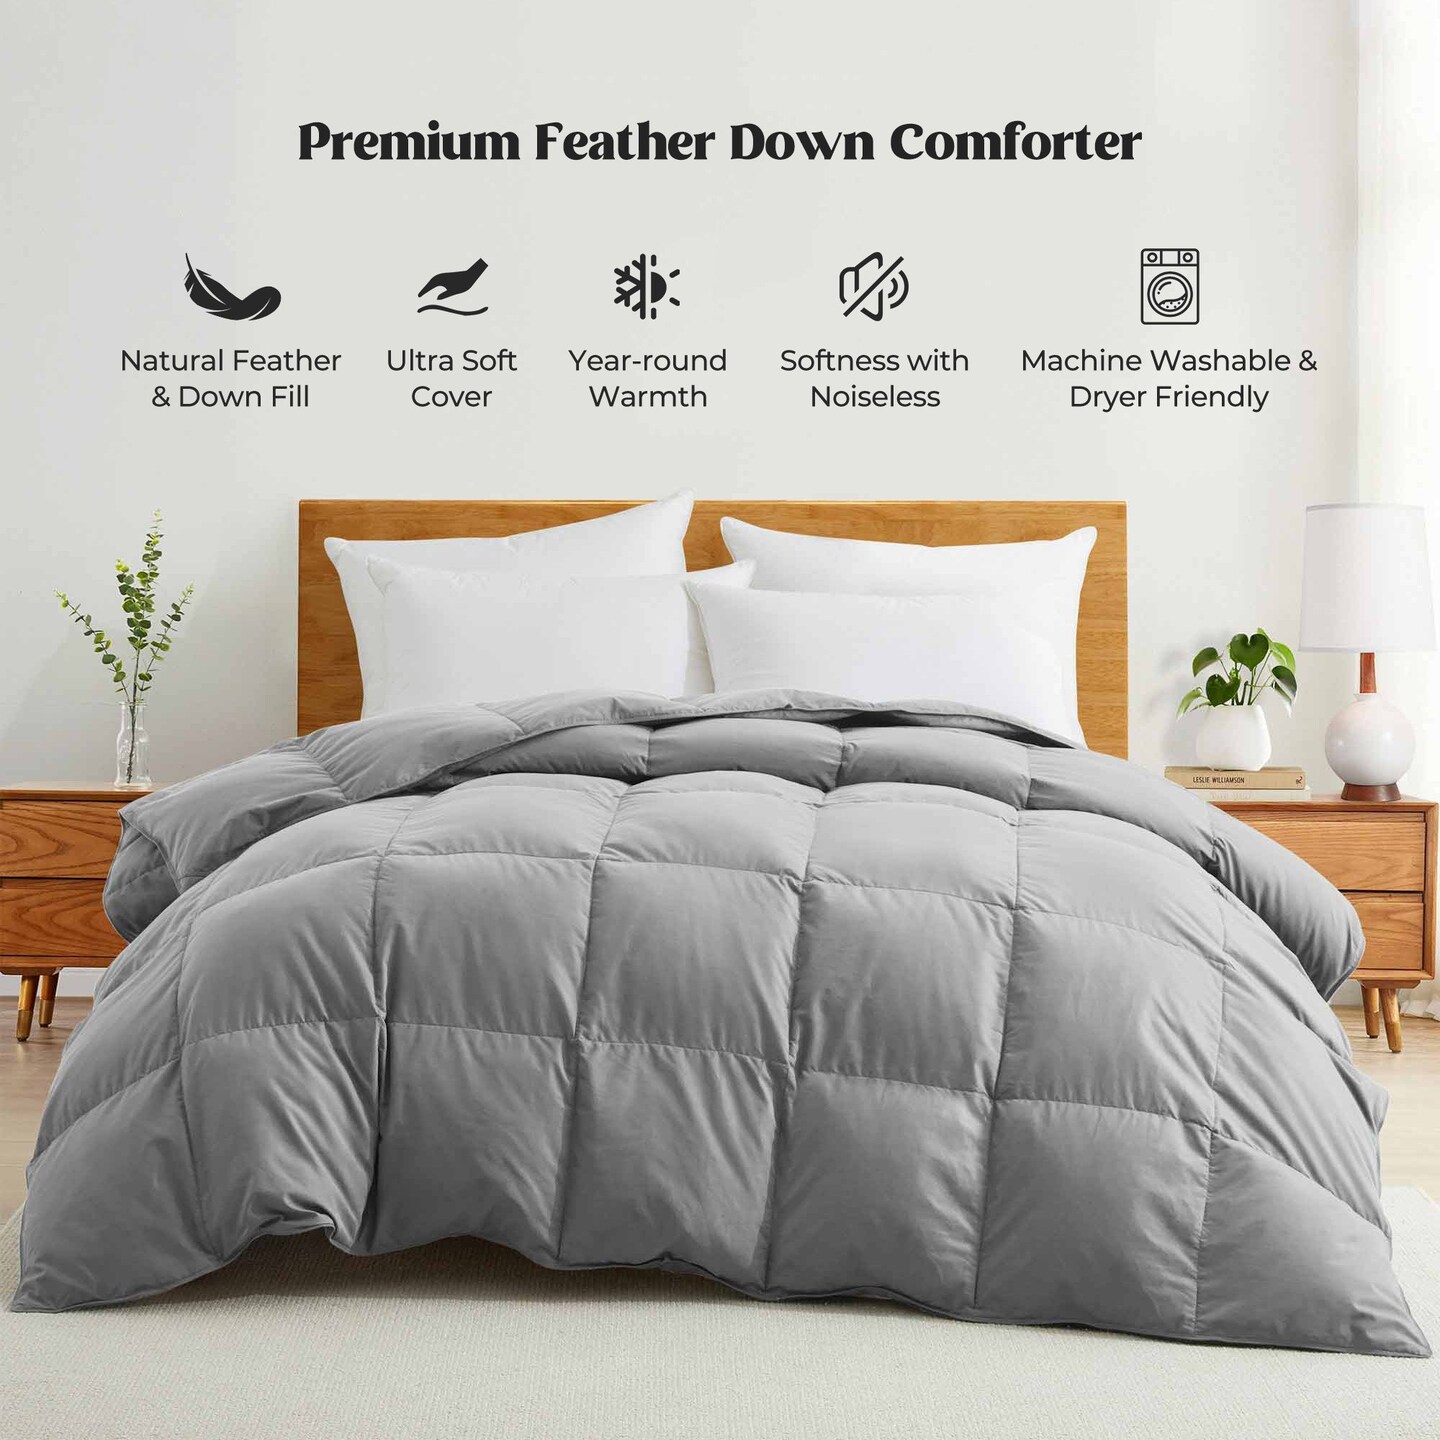 Puredown All Seasons Goose Down Feather Comforter Ultra Soft Comforter with Peach Skin Fabric